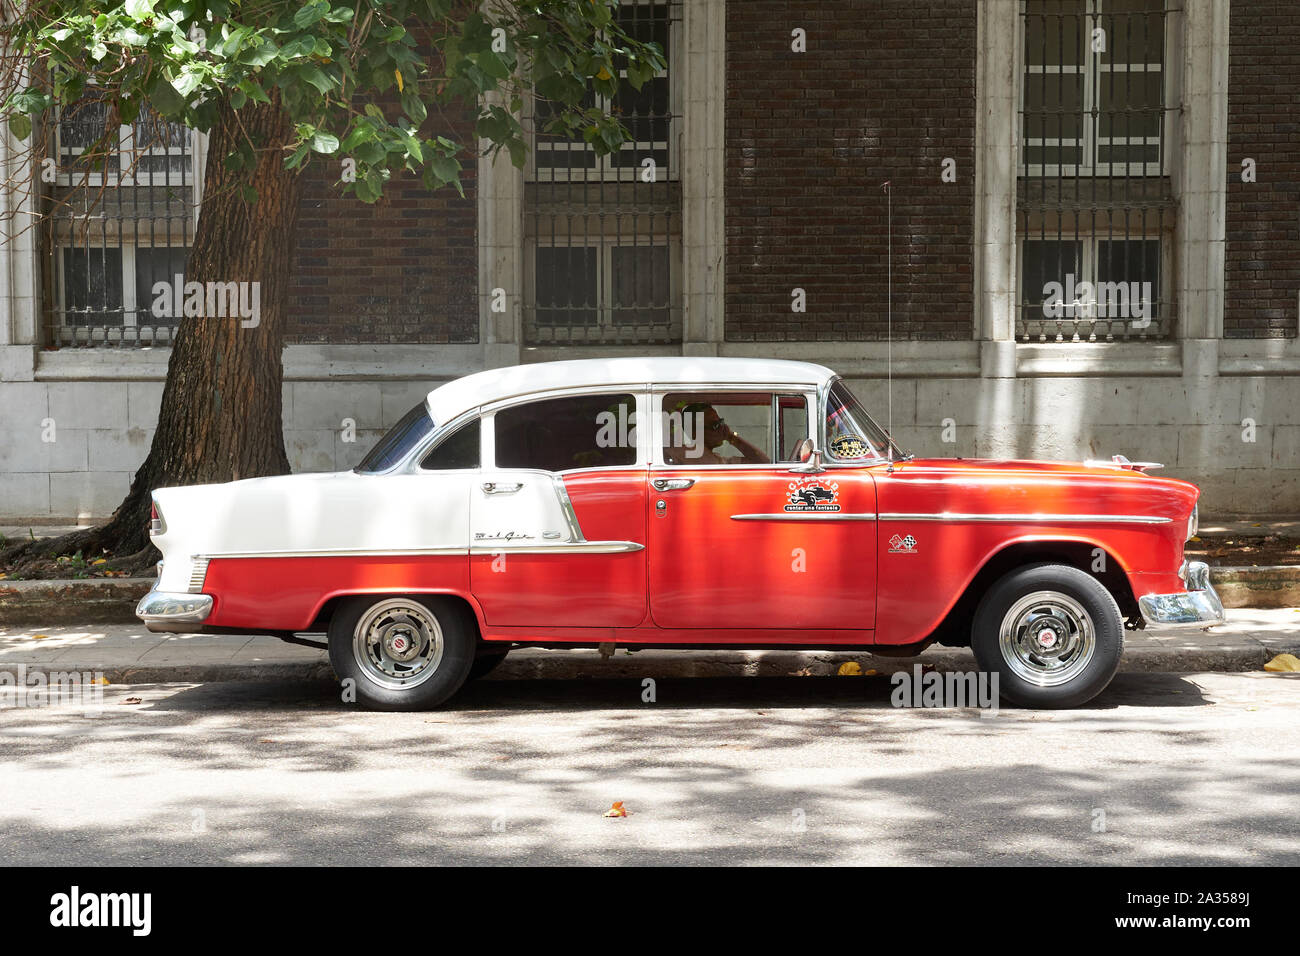 Classic cars, taxis, trucks and motorcycles are abundant on the streets of Havana, Cuba Stock Photo